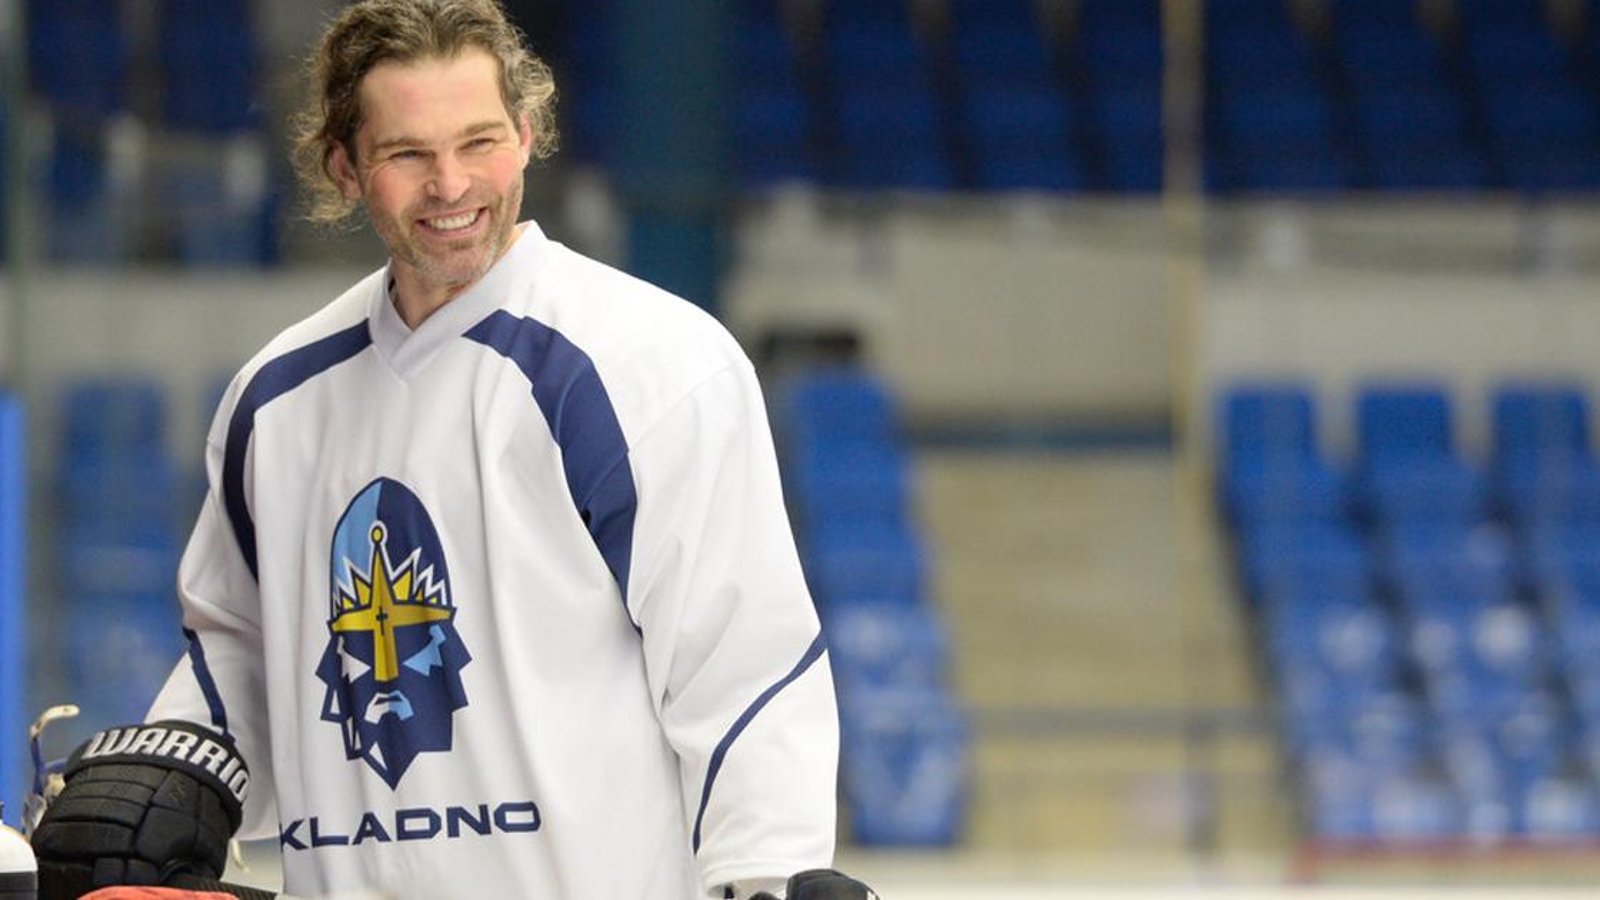 Jaromir Jagr showed he still has it in his first game with Kladno